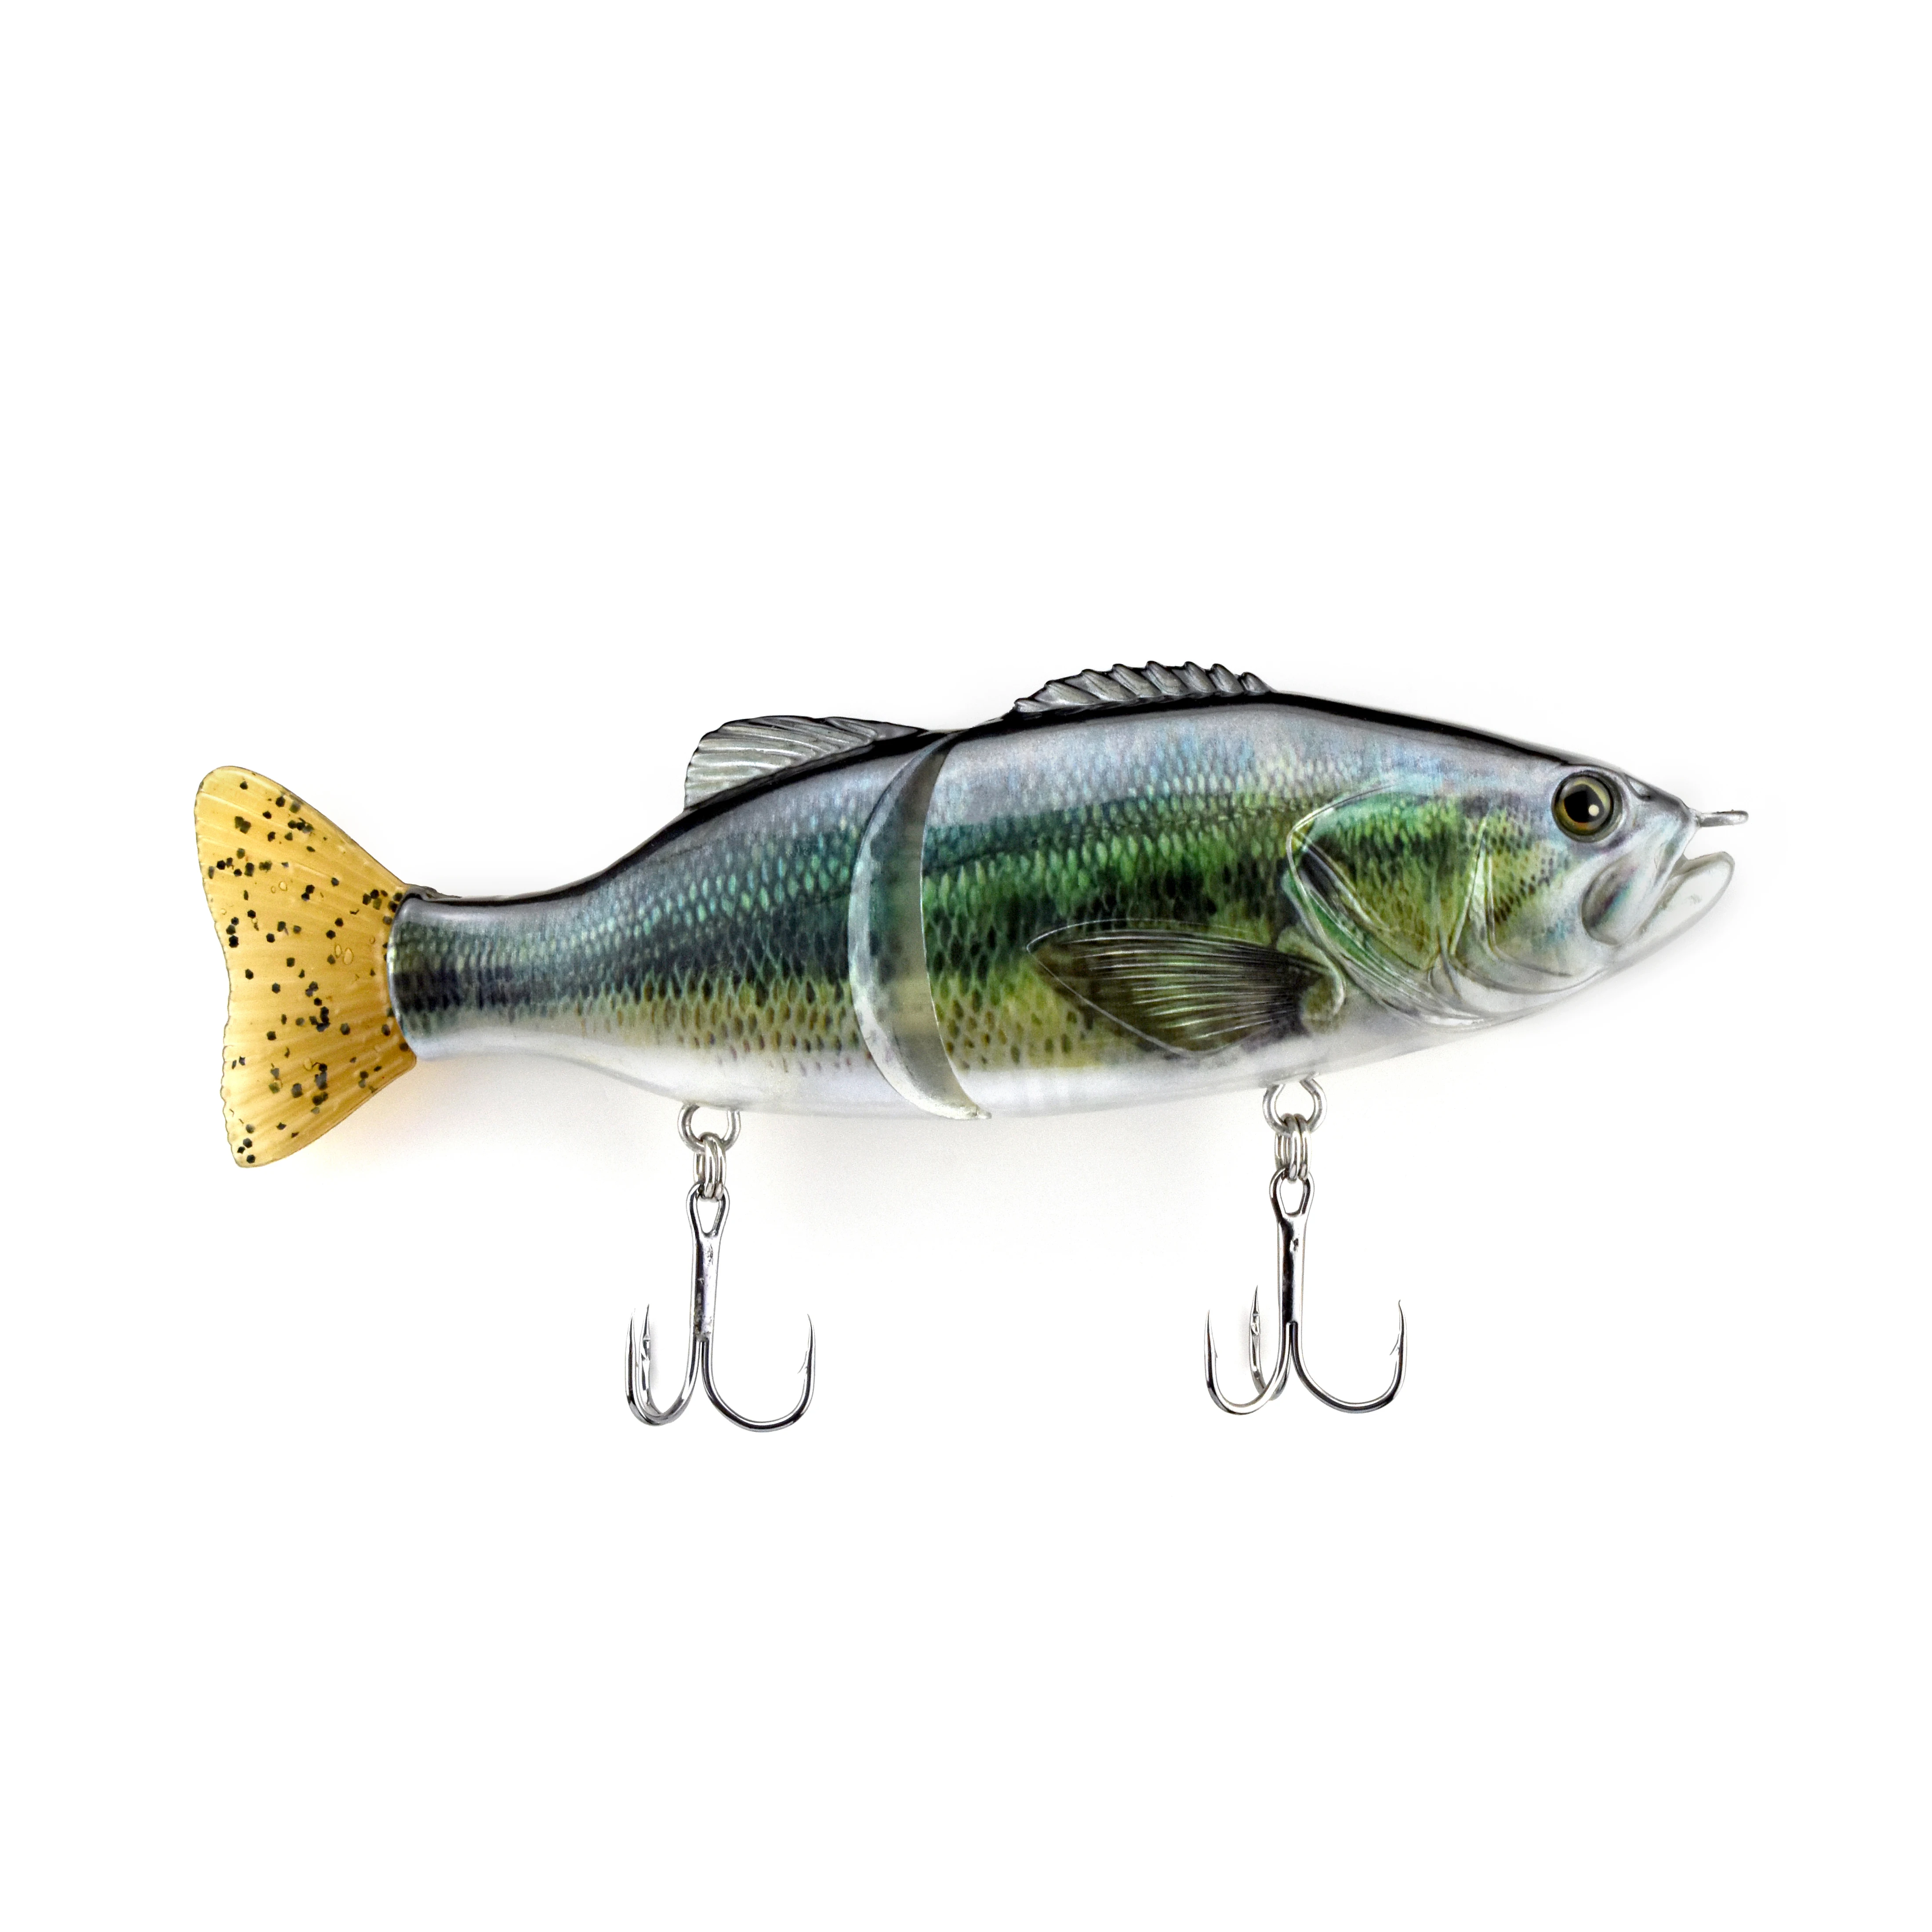 

New Bluegill Glide Bait 17cm 87g Trout Fishing Lures Artificial Hard Plastic Baits Hot sale products